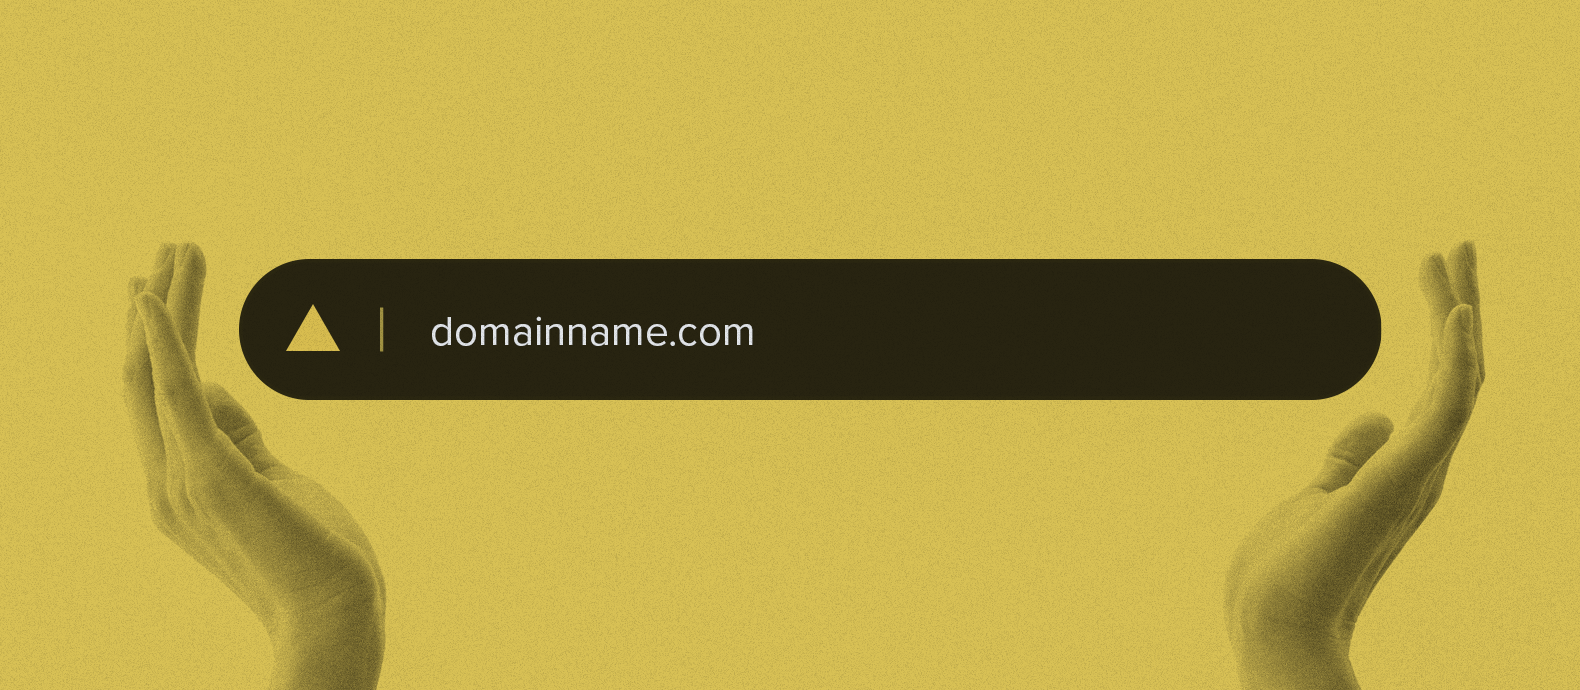 How to trademark a domain name